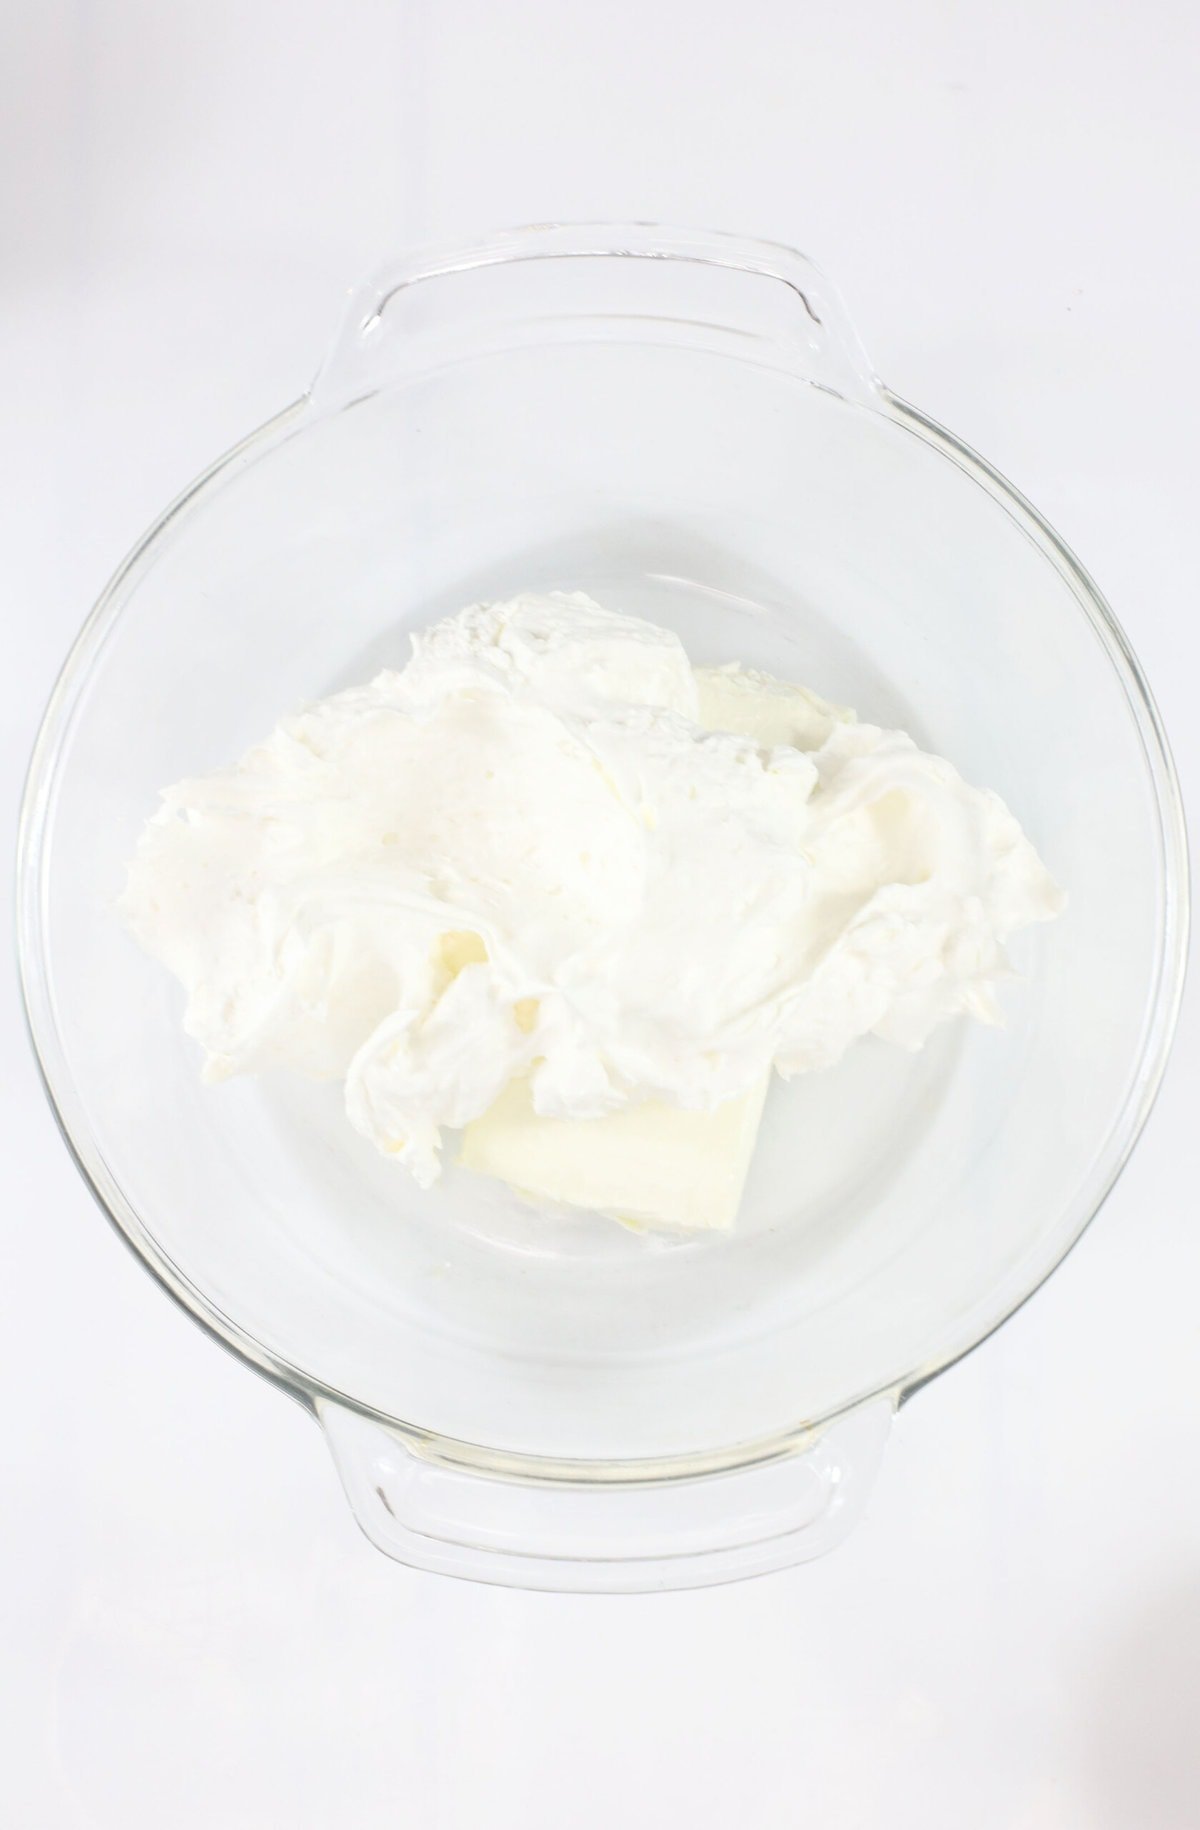 Combining the cool whip and cream cheese.